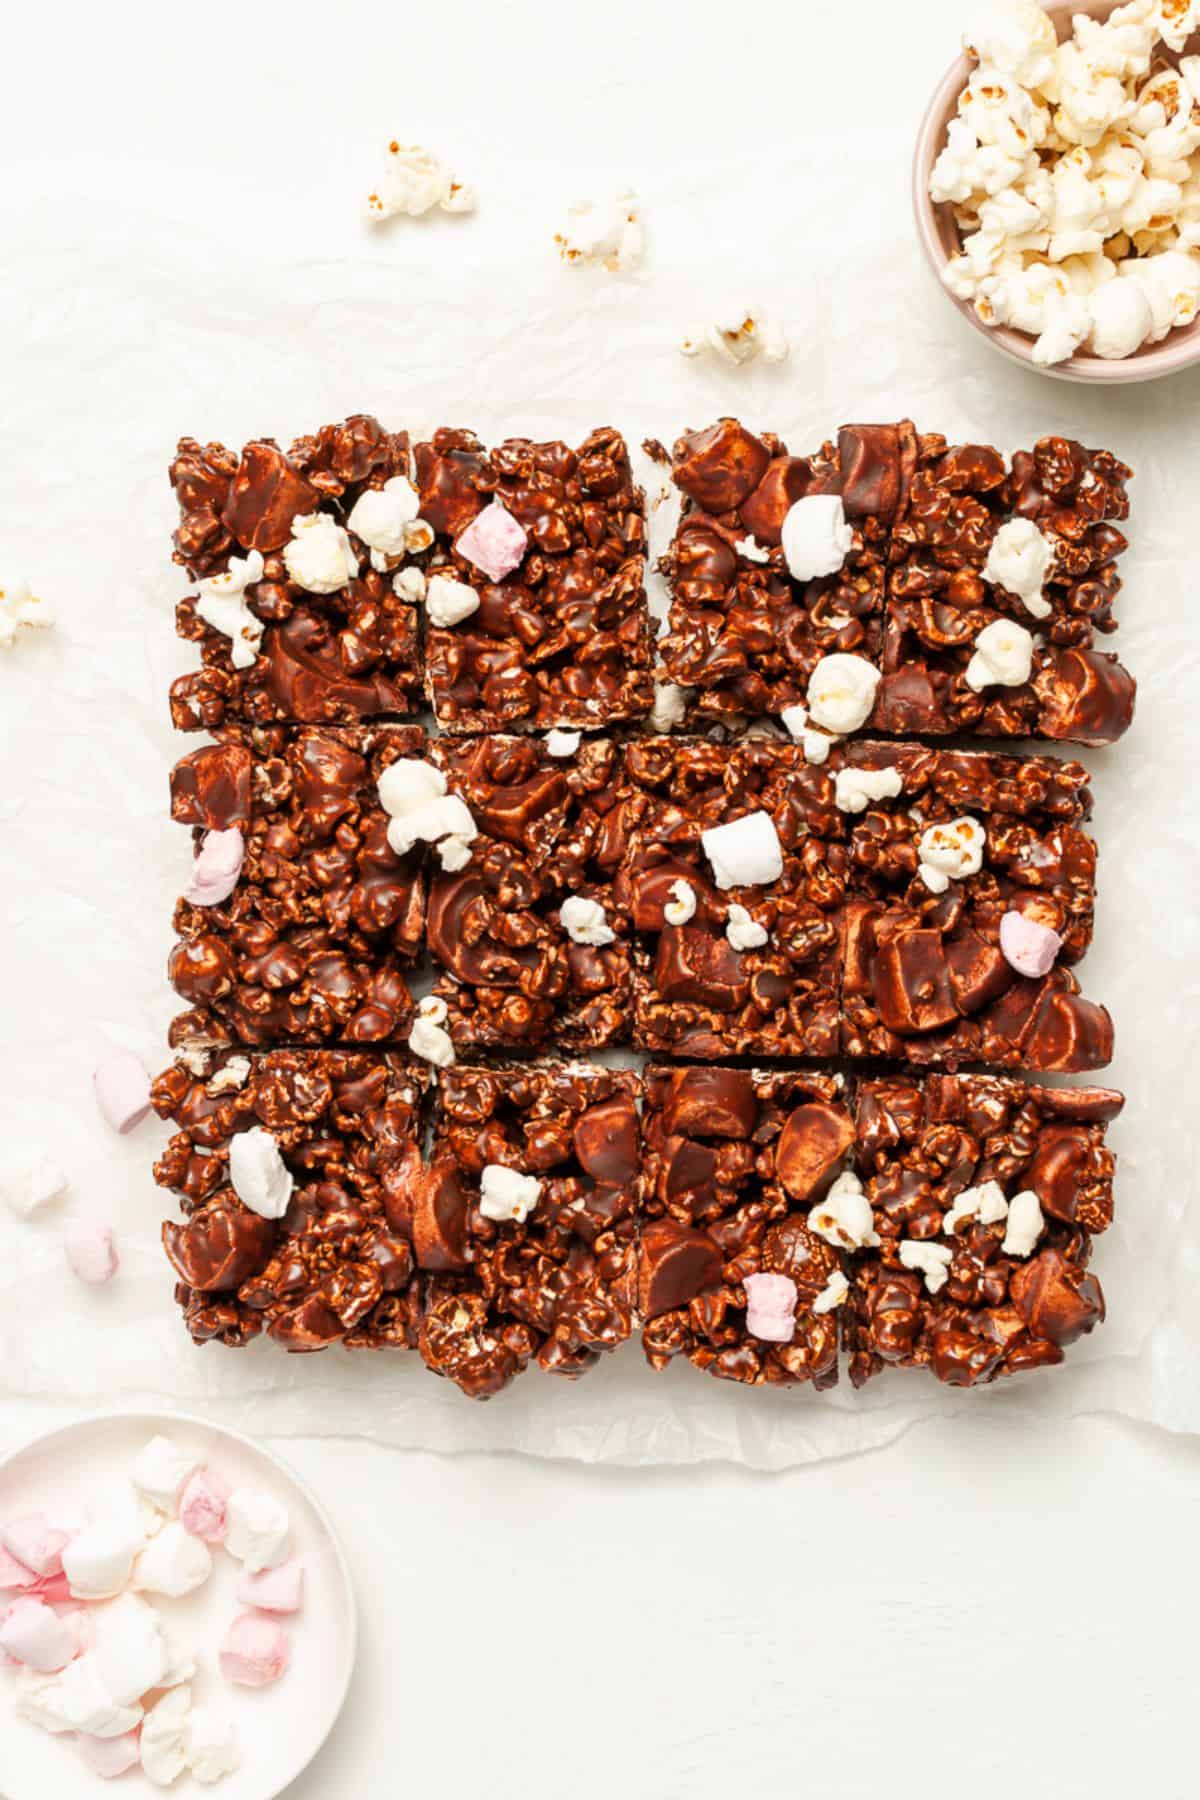 Twelve cut squares of chocolate popcorn bars on some baking paper, with some popcorn scattered around the edges.